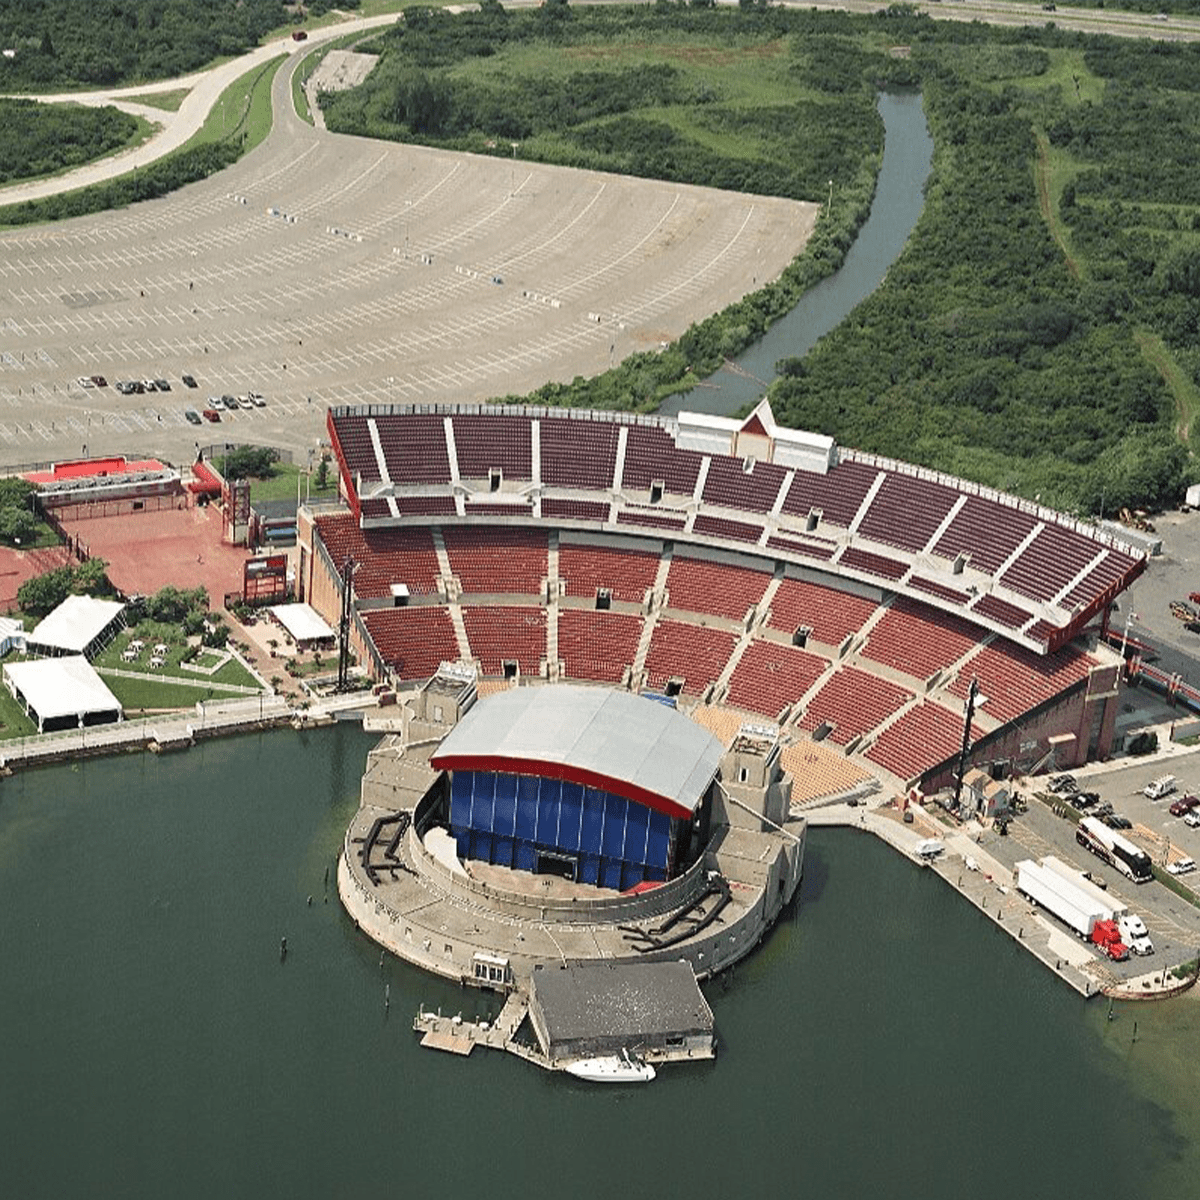 Birds eye view of entire stadium and parking lot